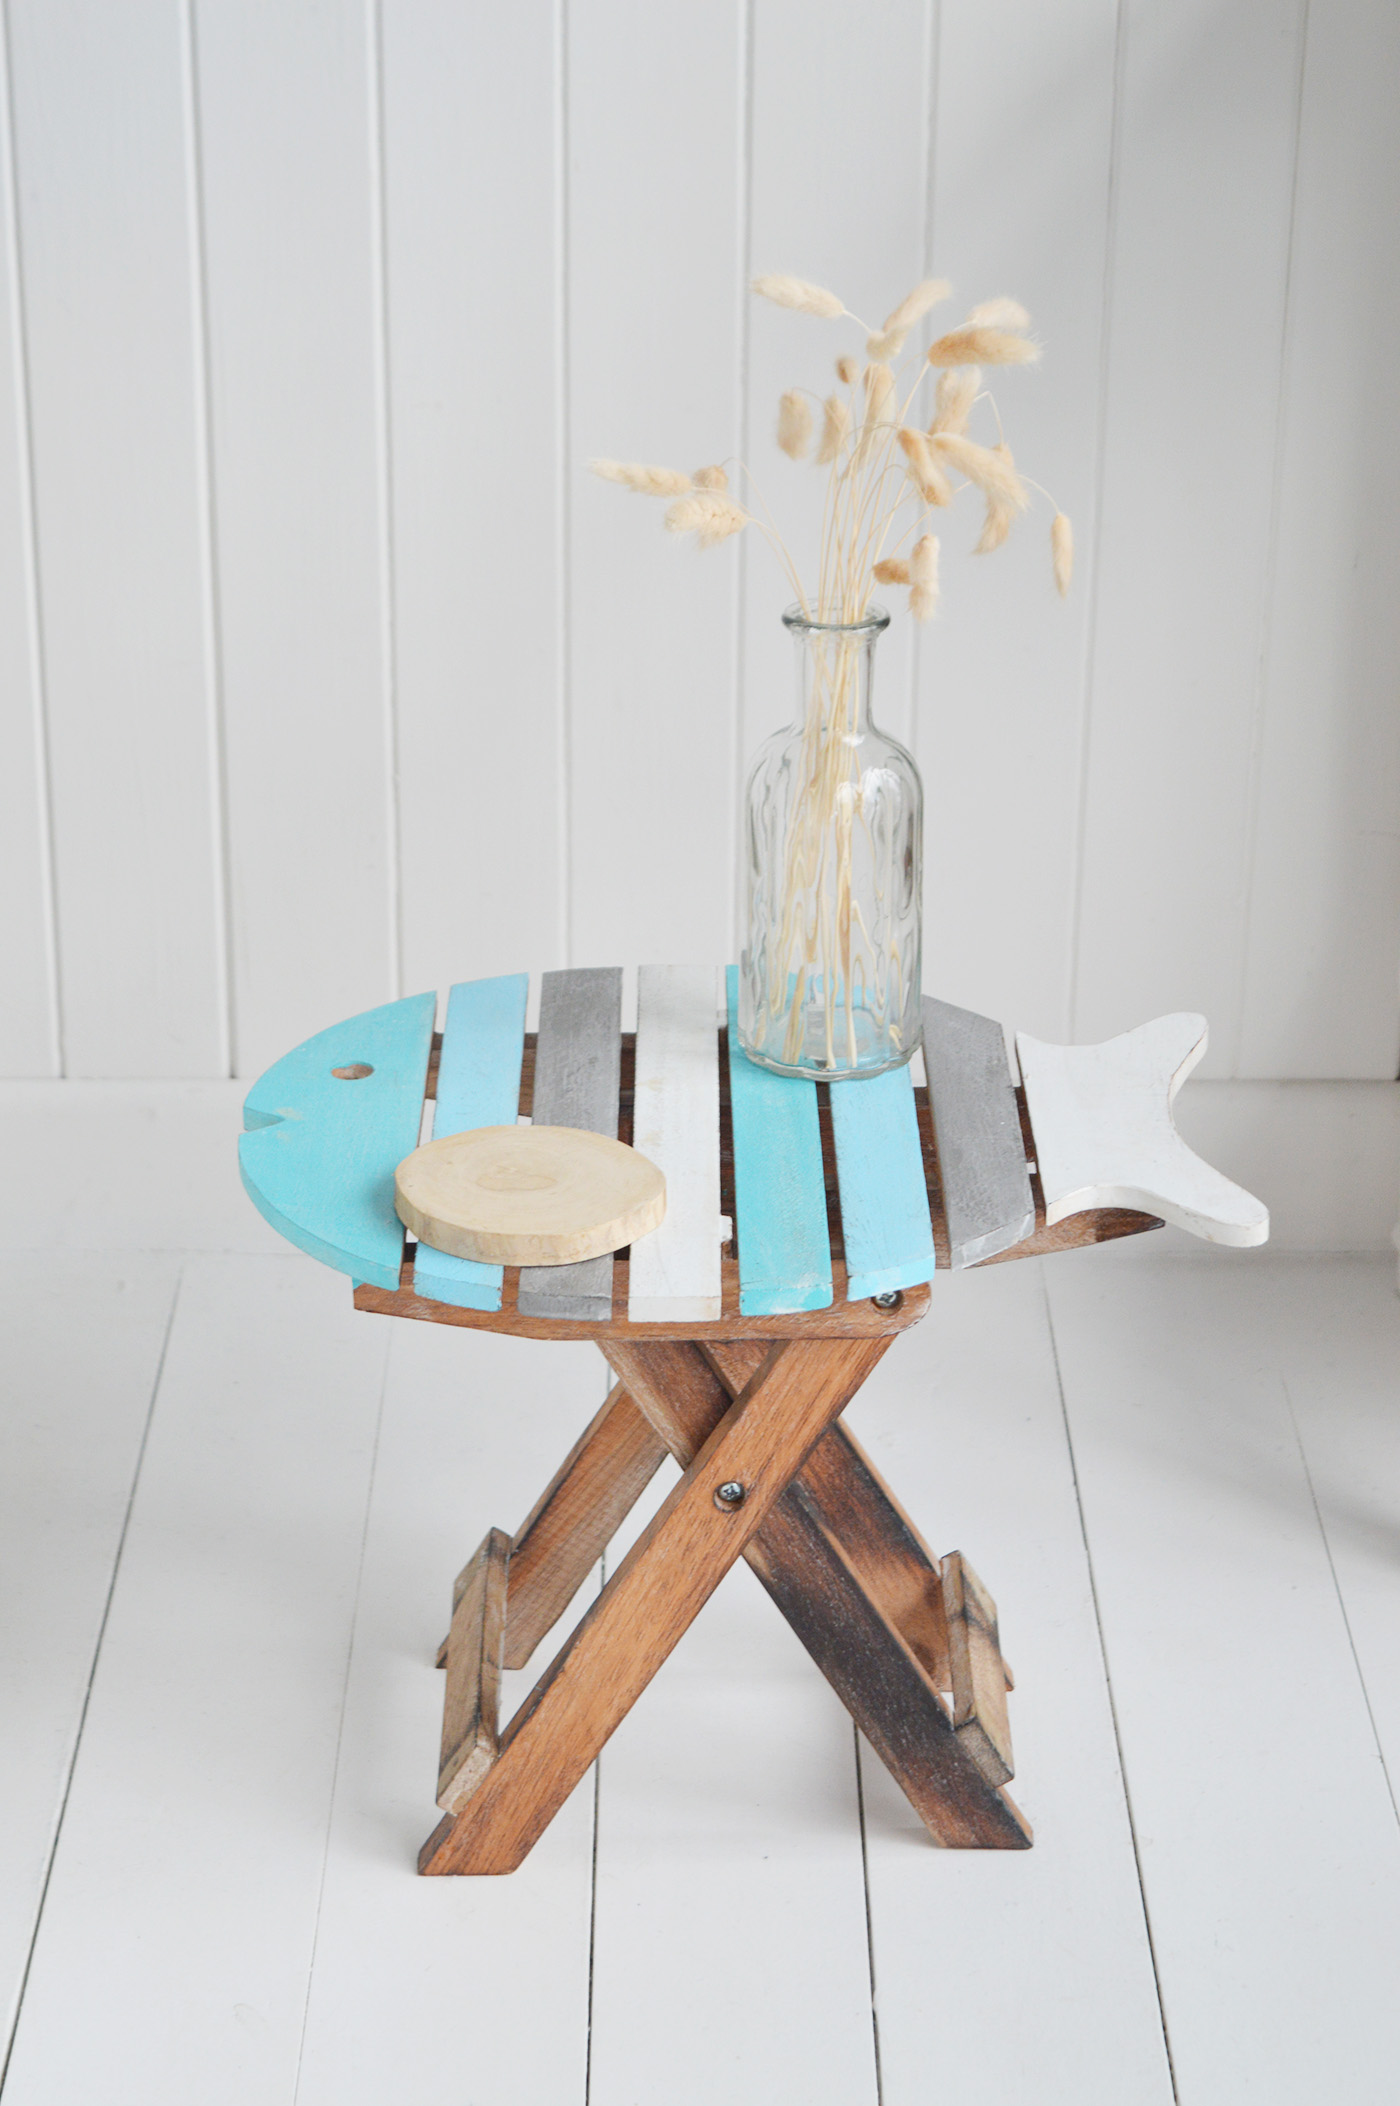 Coastal Wooden little Table and Stool for New England coastal from The White Lighthouse. Bathroom, Living Room, Bedroom and Hallway Furniture for beautiful homes